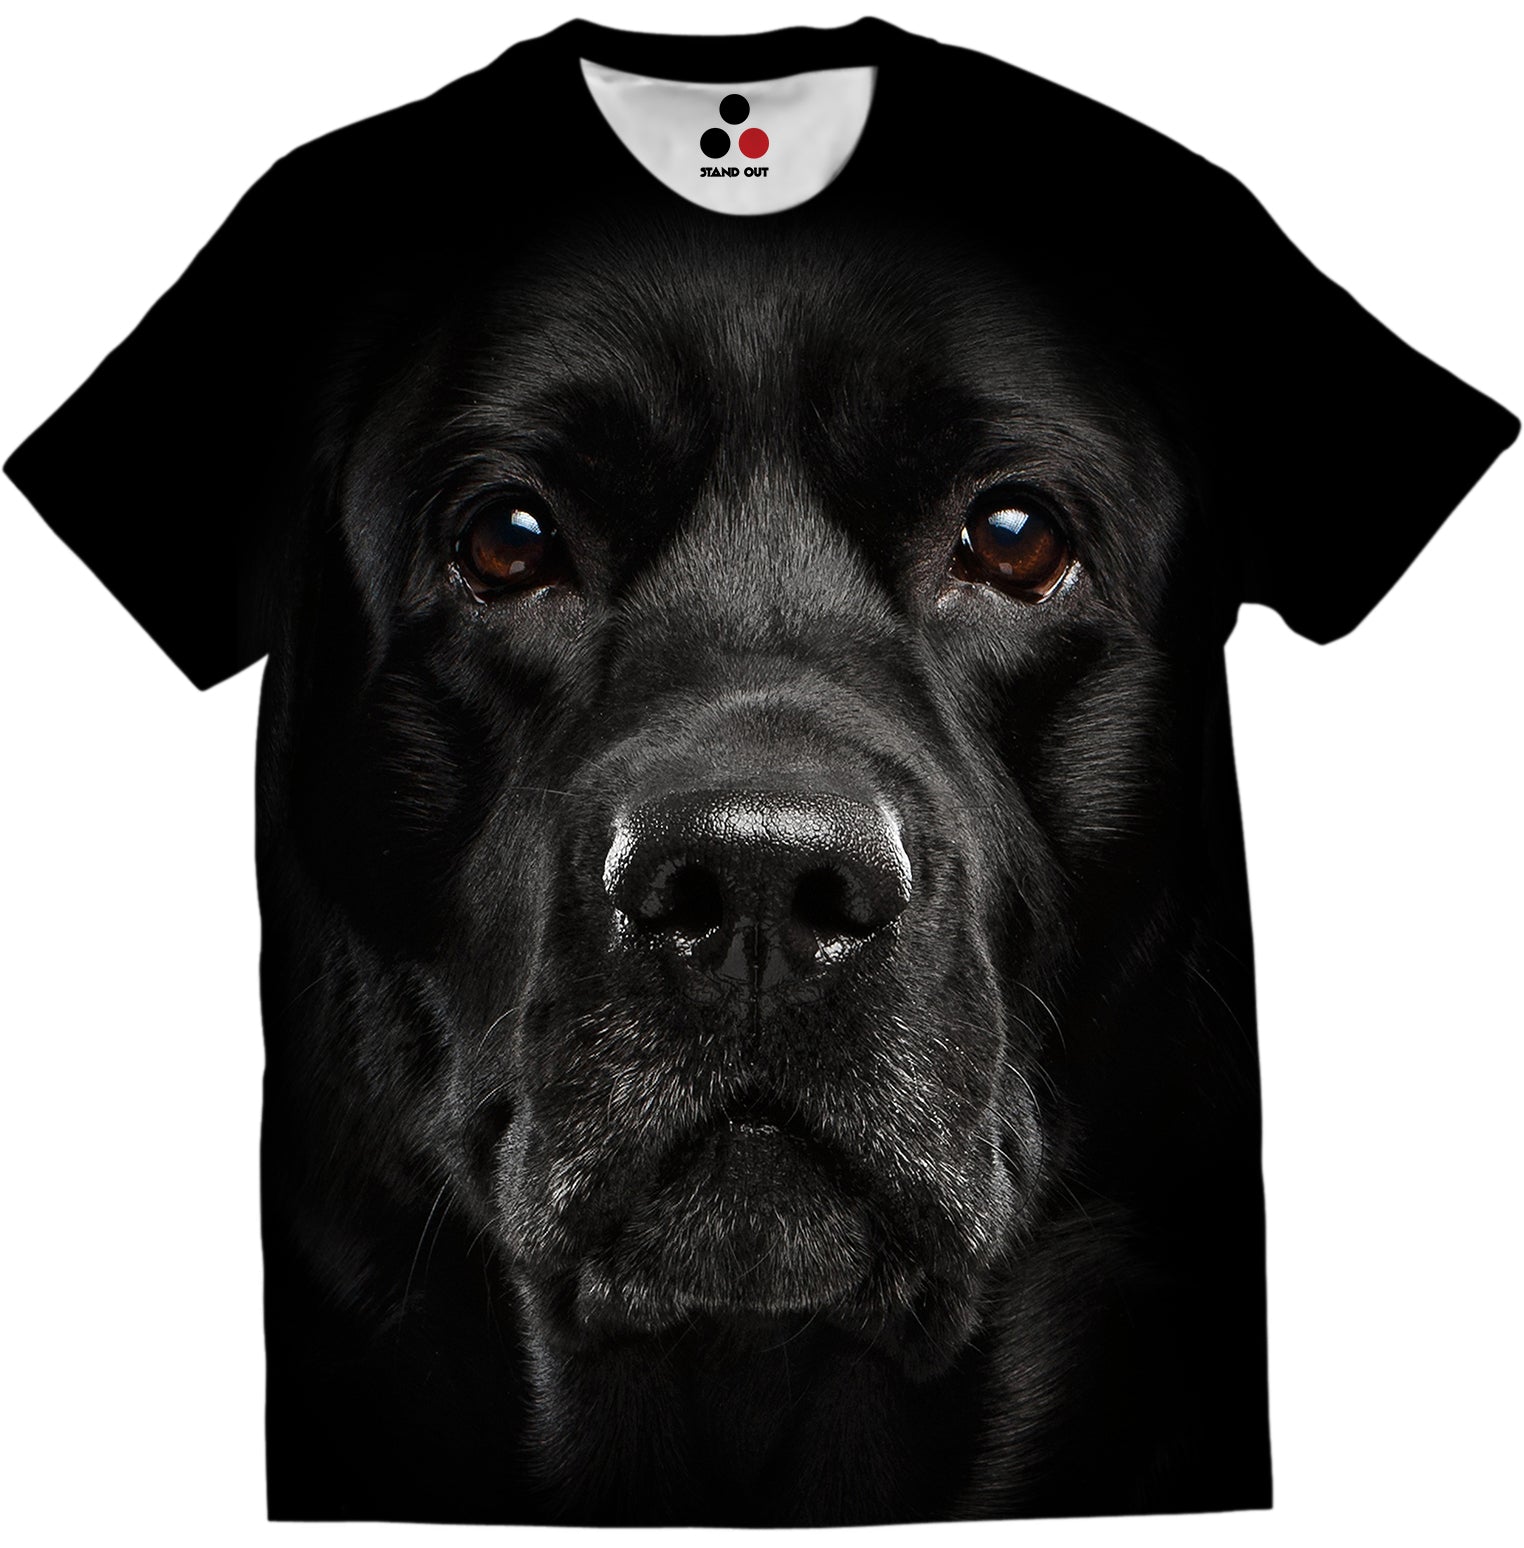 stand out black labrador t shirt dog face printed t shirt redwolf souled store bewakoof osomwear dog show in india the kennel club of india dog t shirts for humans funny dog shirts dog graphic t shirts dogteeshop dog lover t shirt dog clothes online dog print t shirts india pet lover t shirt 3d animal print t shirts pet supply the mountain t shirt Labrador t shirt